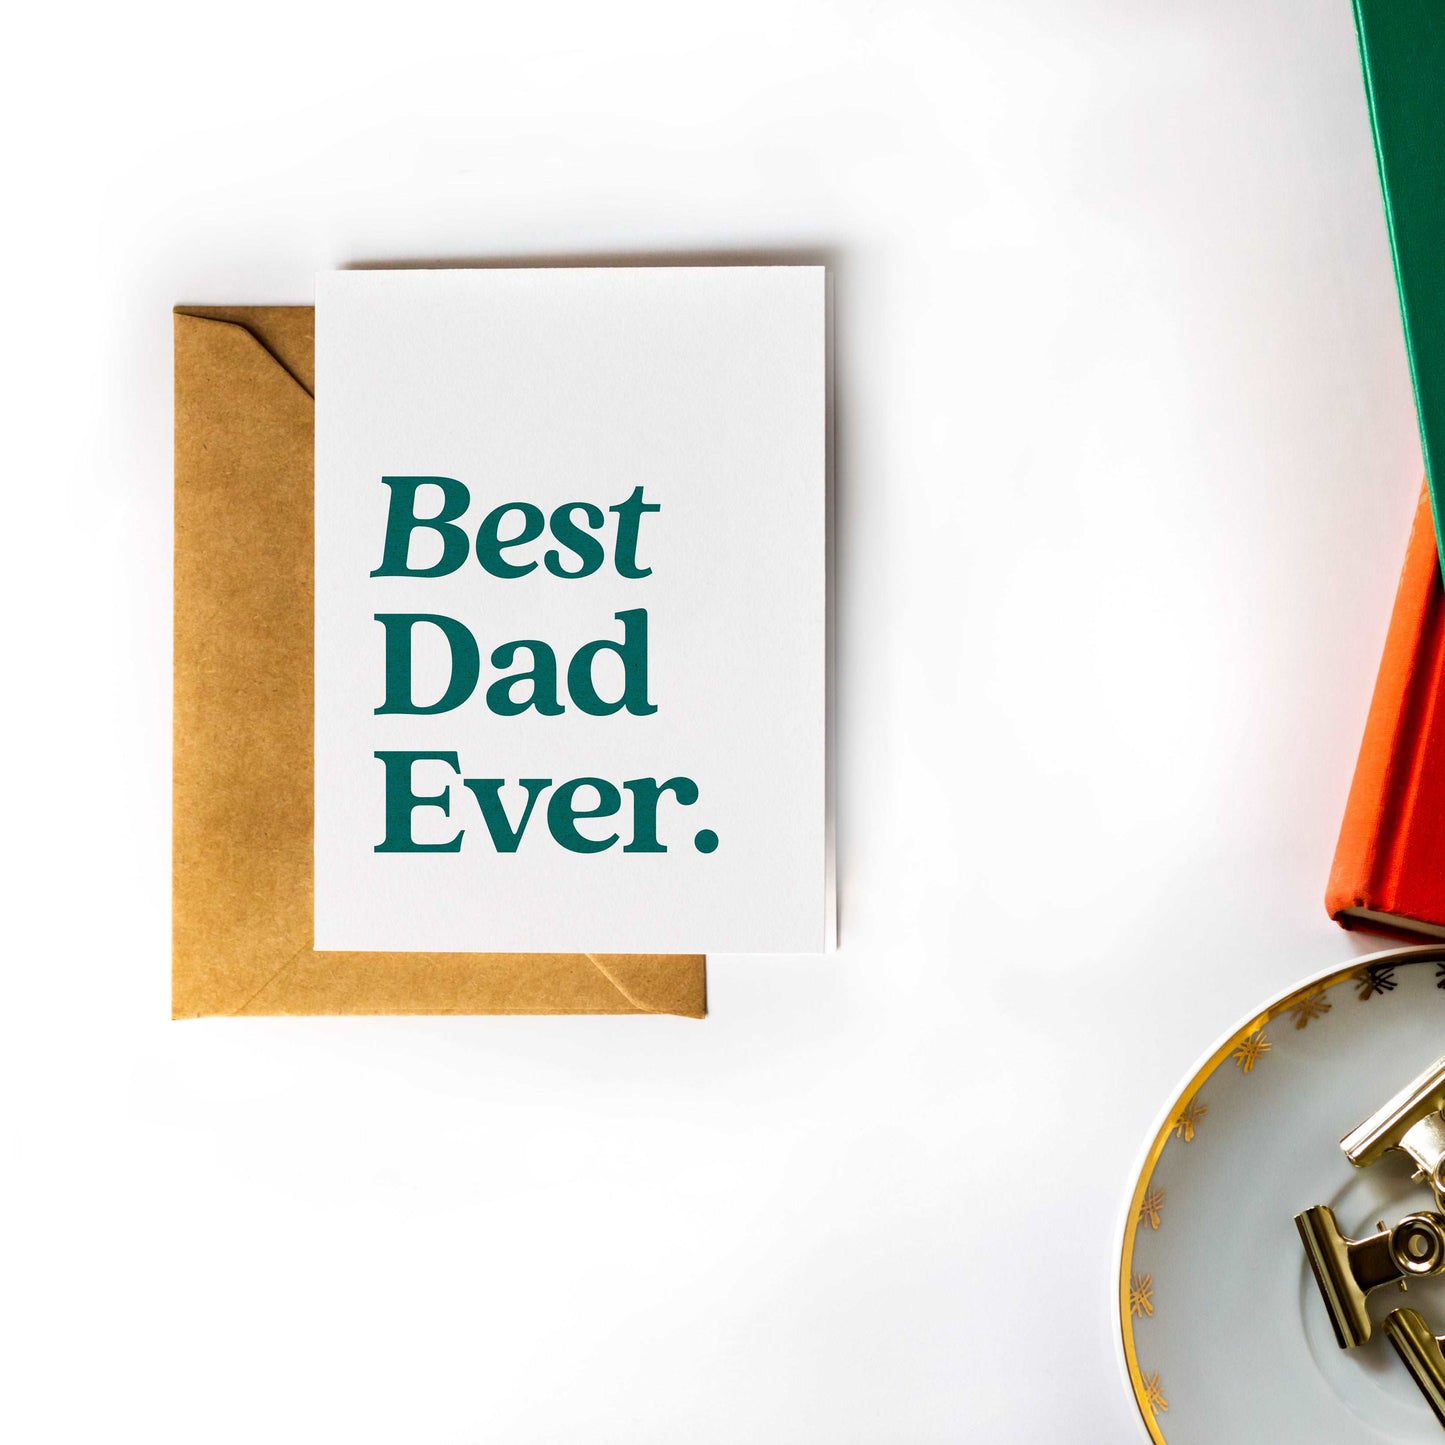 Best Dad Ever - Father's Day Greeting Card with Kraft Envelope (Blank Inside)